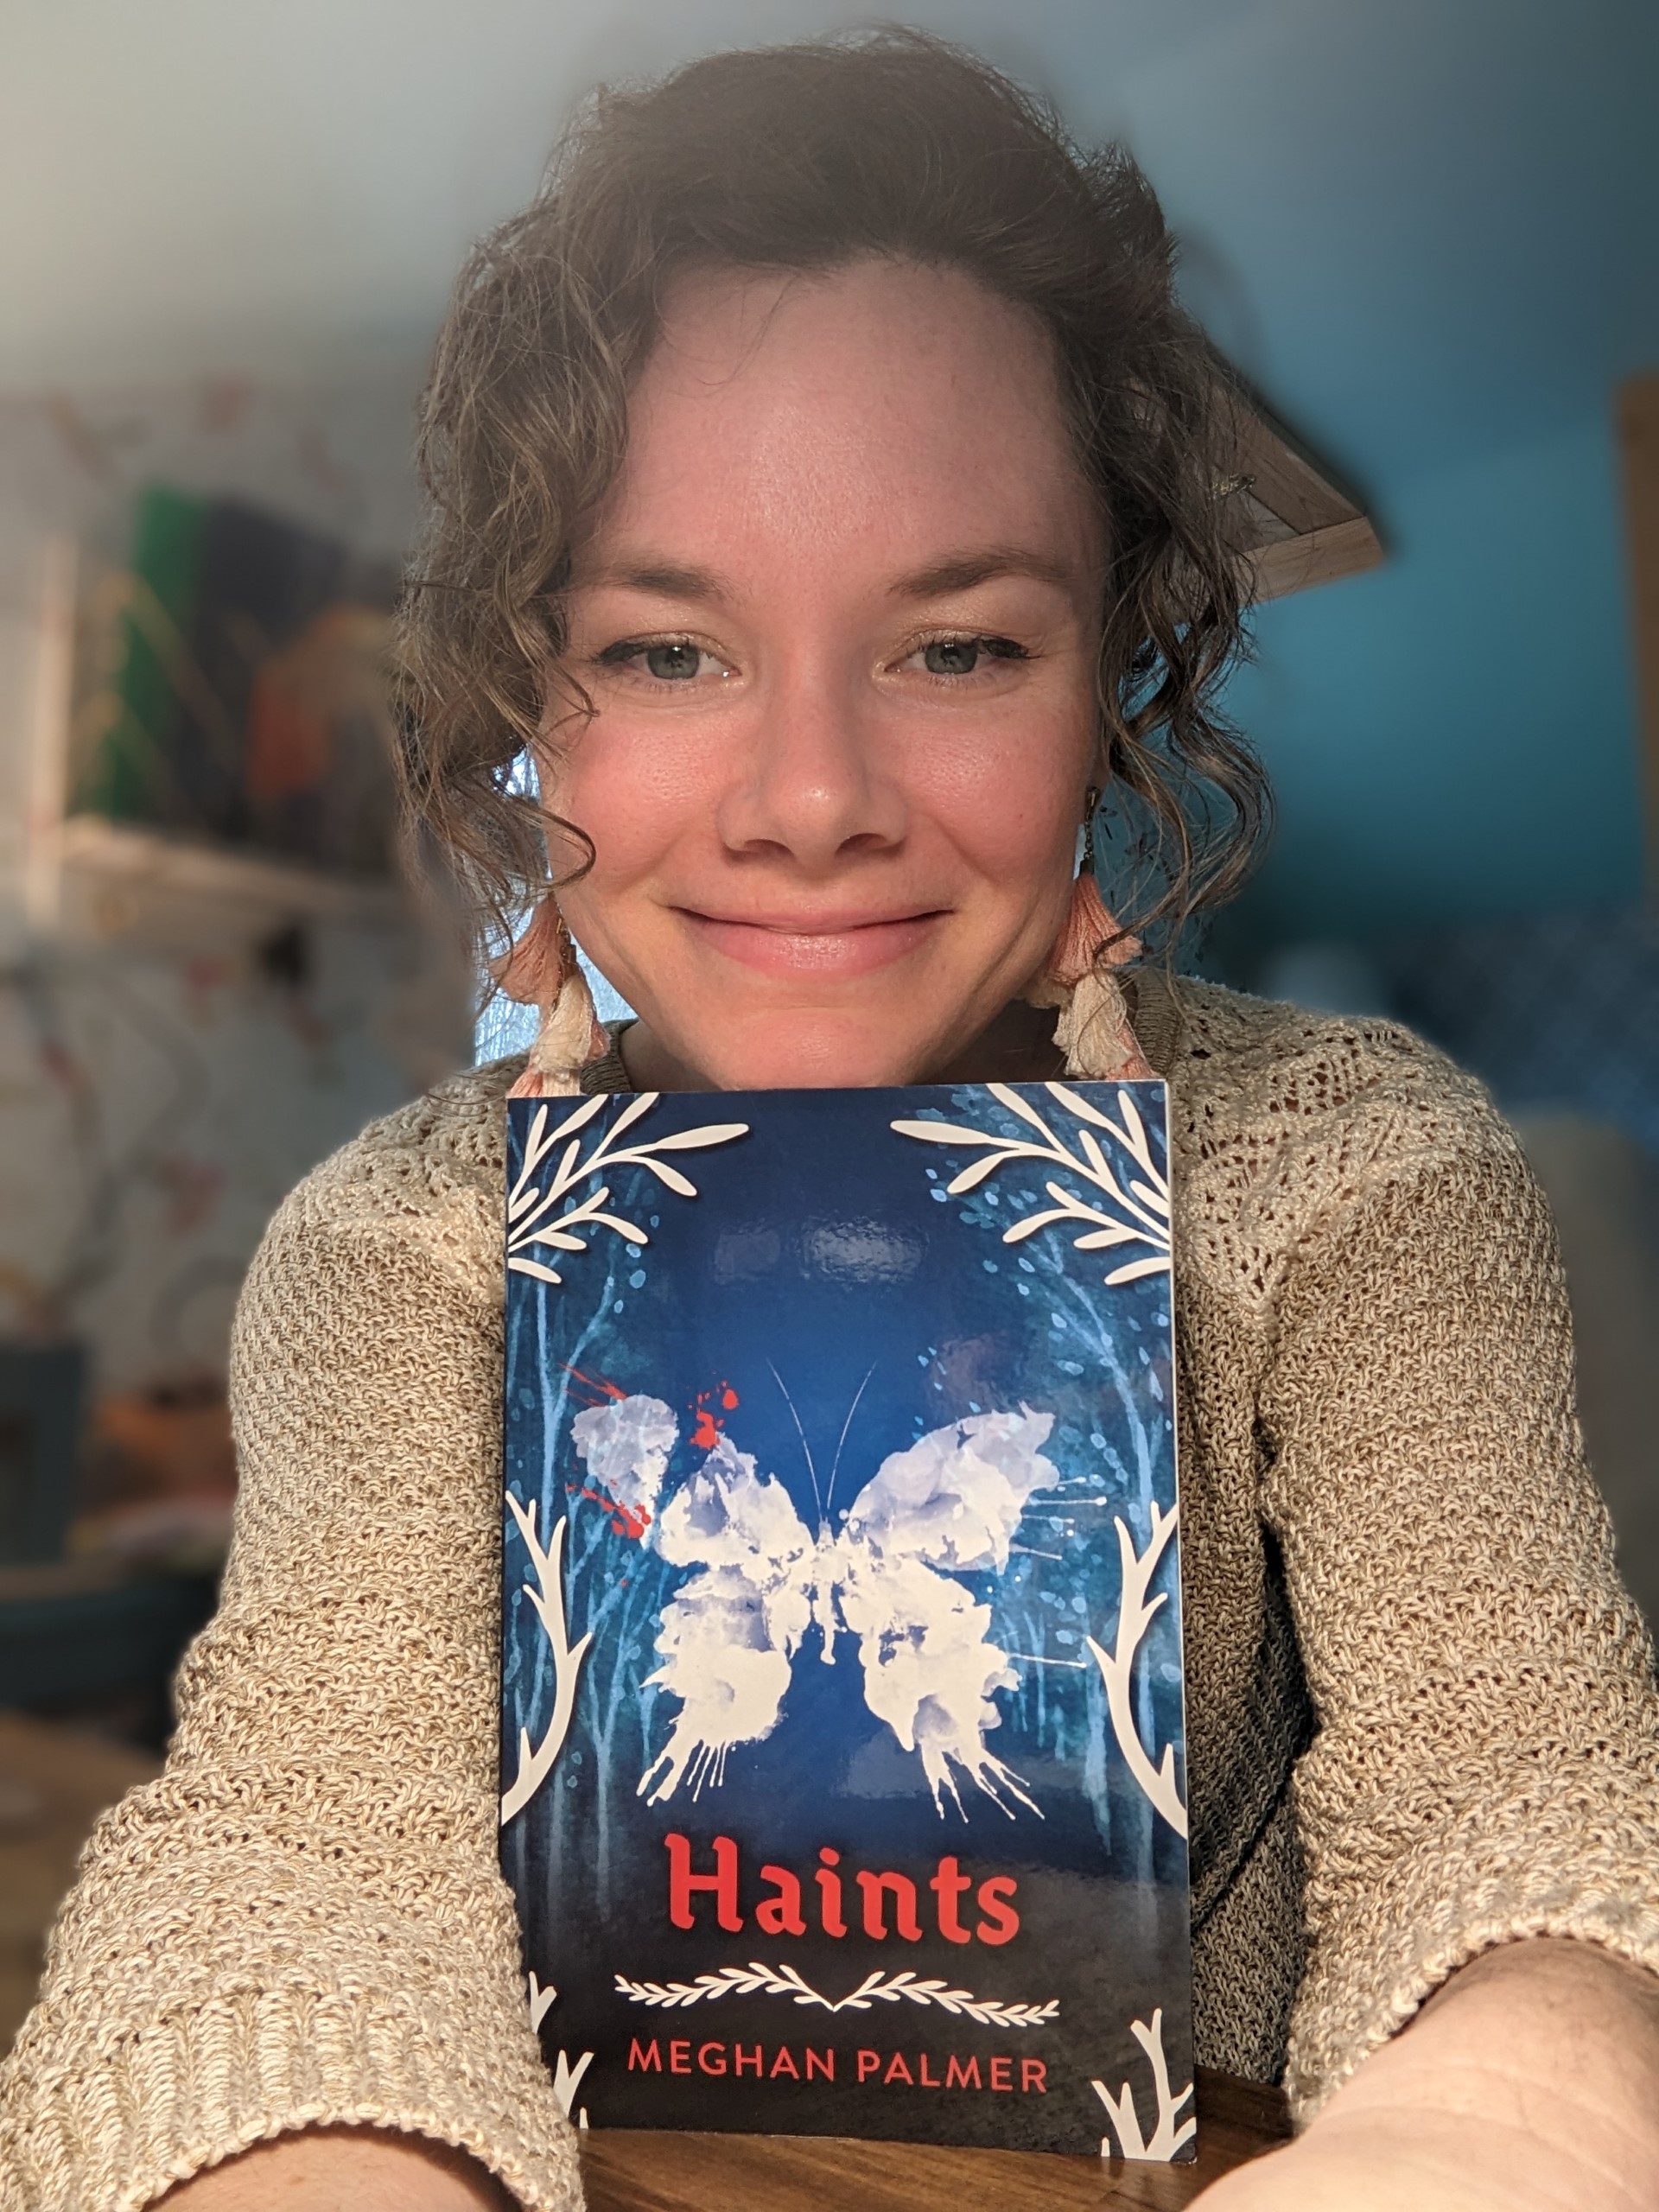 photo of author Meghan Palmer with chin resting on her book entitled haints